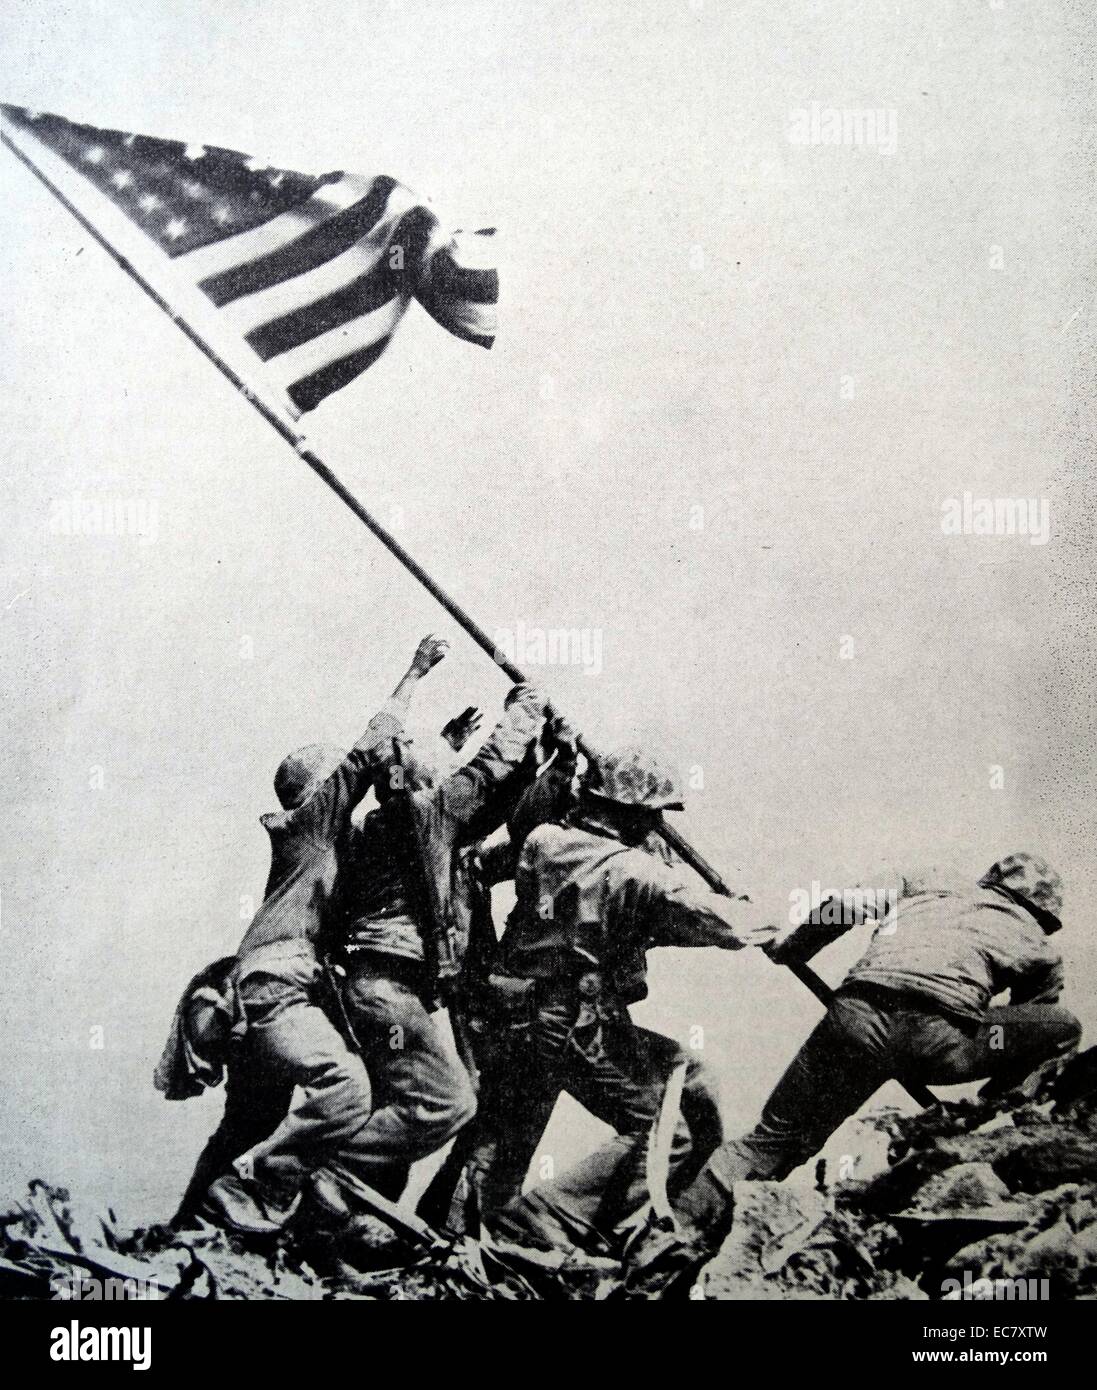 Raising the Flag on Iwo Jima is a historical photograph taken on February 23, 1945.  It depicts five US Marines and a US Navy corpsman raising a US flat atop Mount Suribachi, during the Battle of Iwo Jima in WW2. Stock Photo